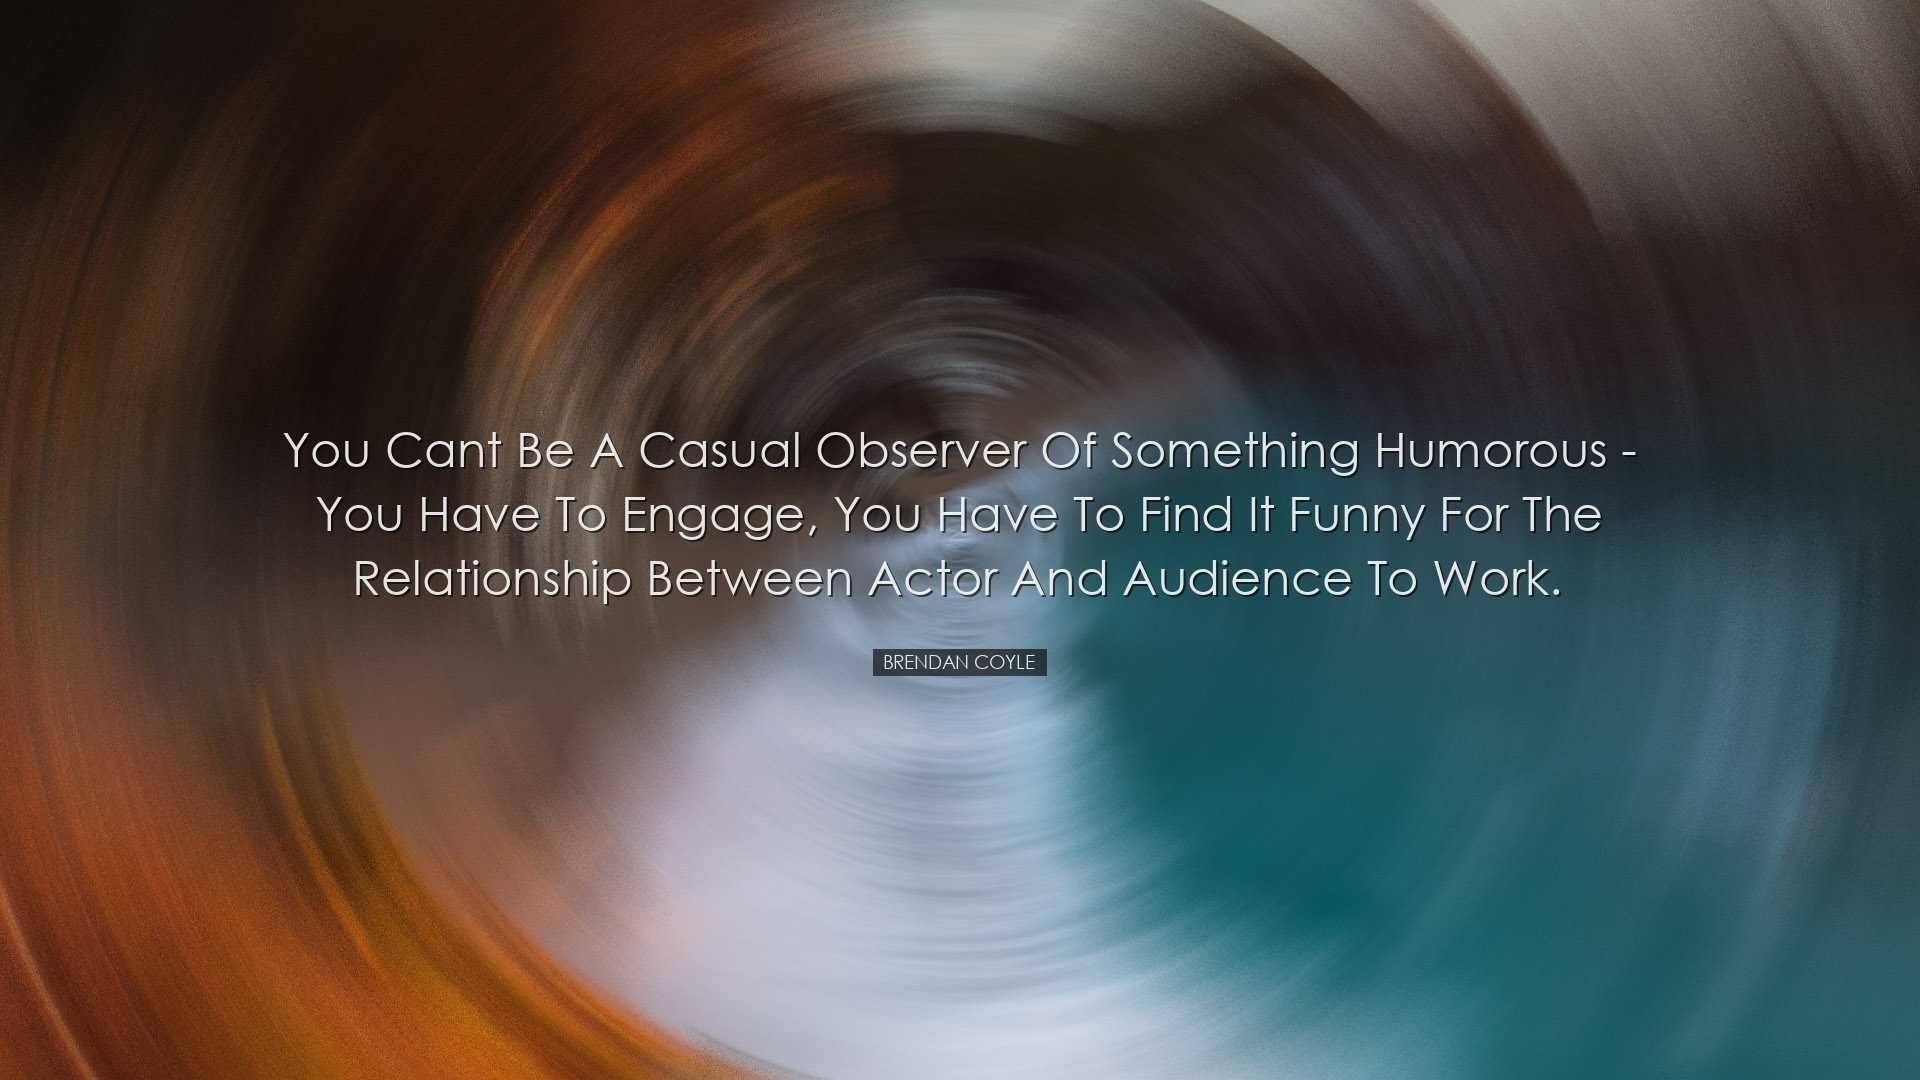 You cant be a casual observer of something humorous - you have to